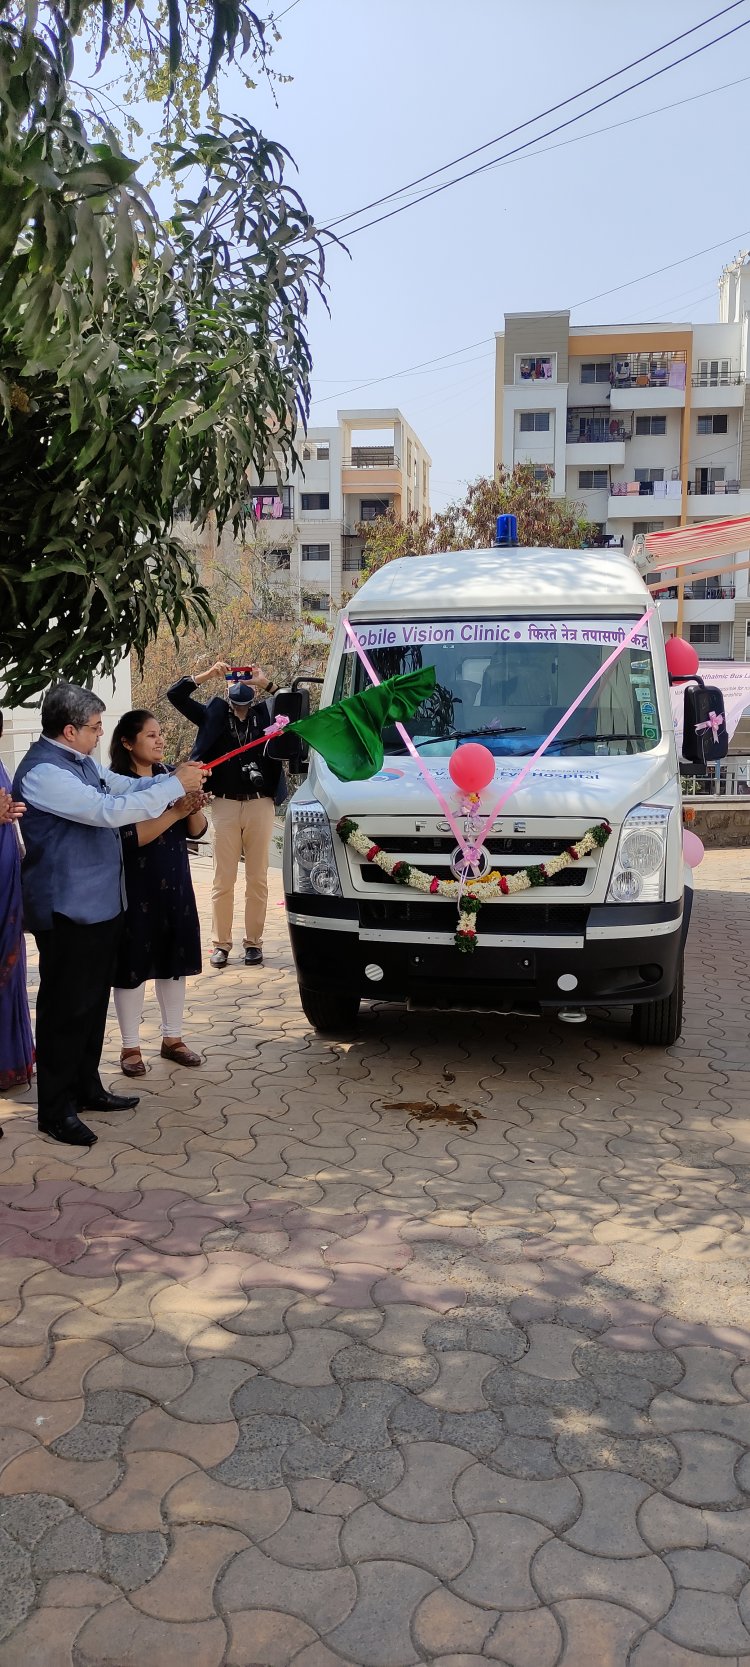 SBI General donates three Mobile Ophthalmic Vans to provide quality eye healthcare in rural communities